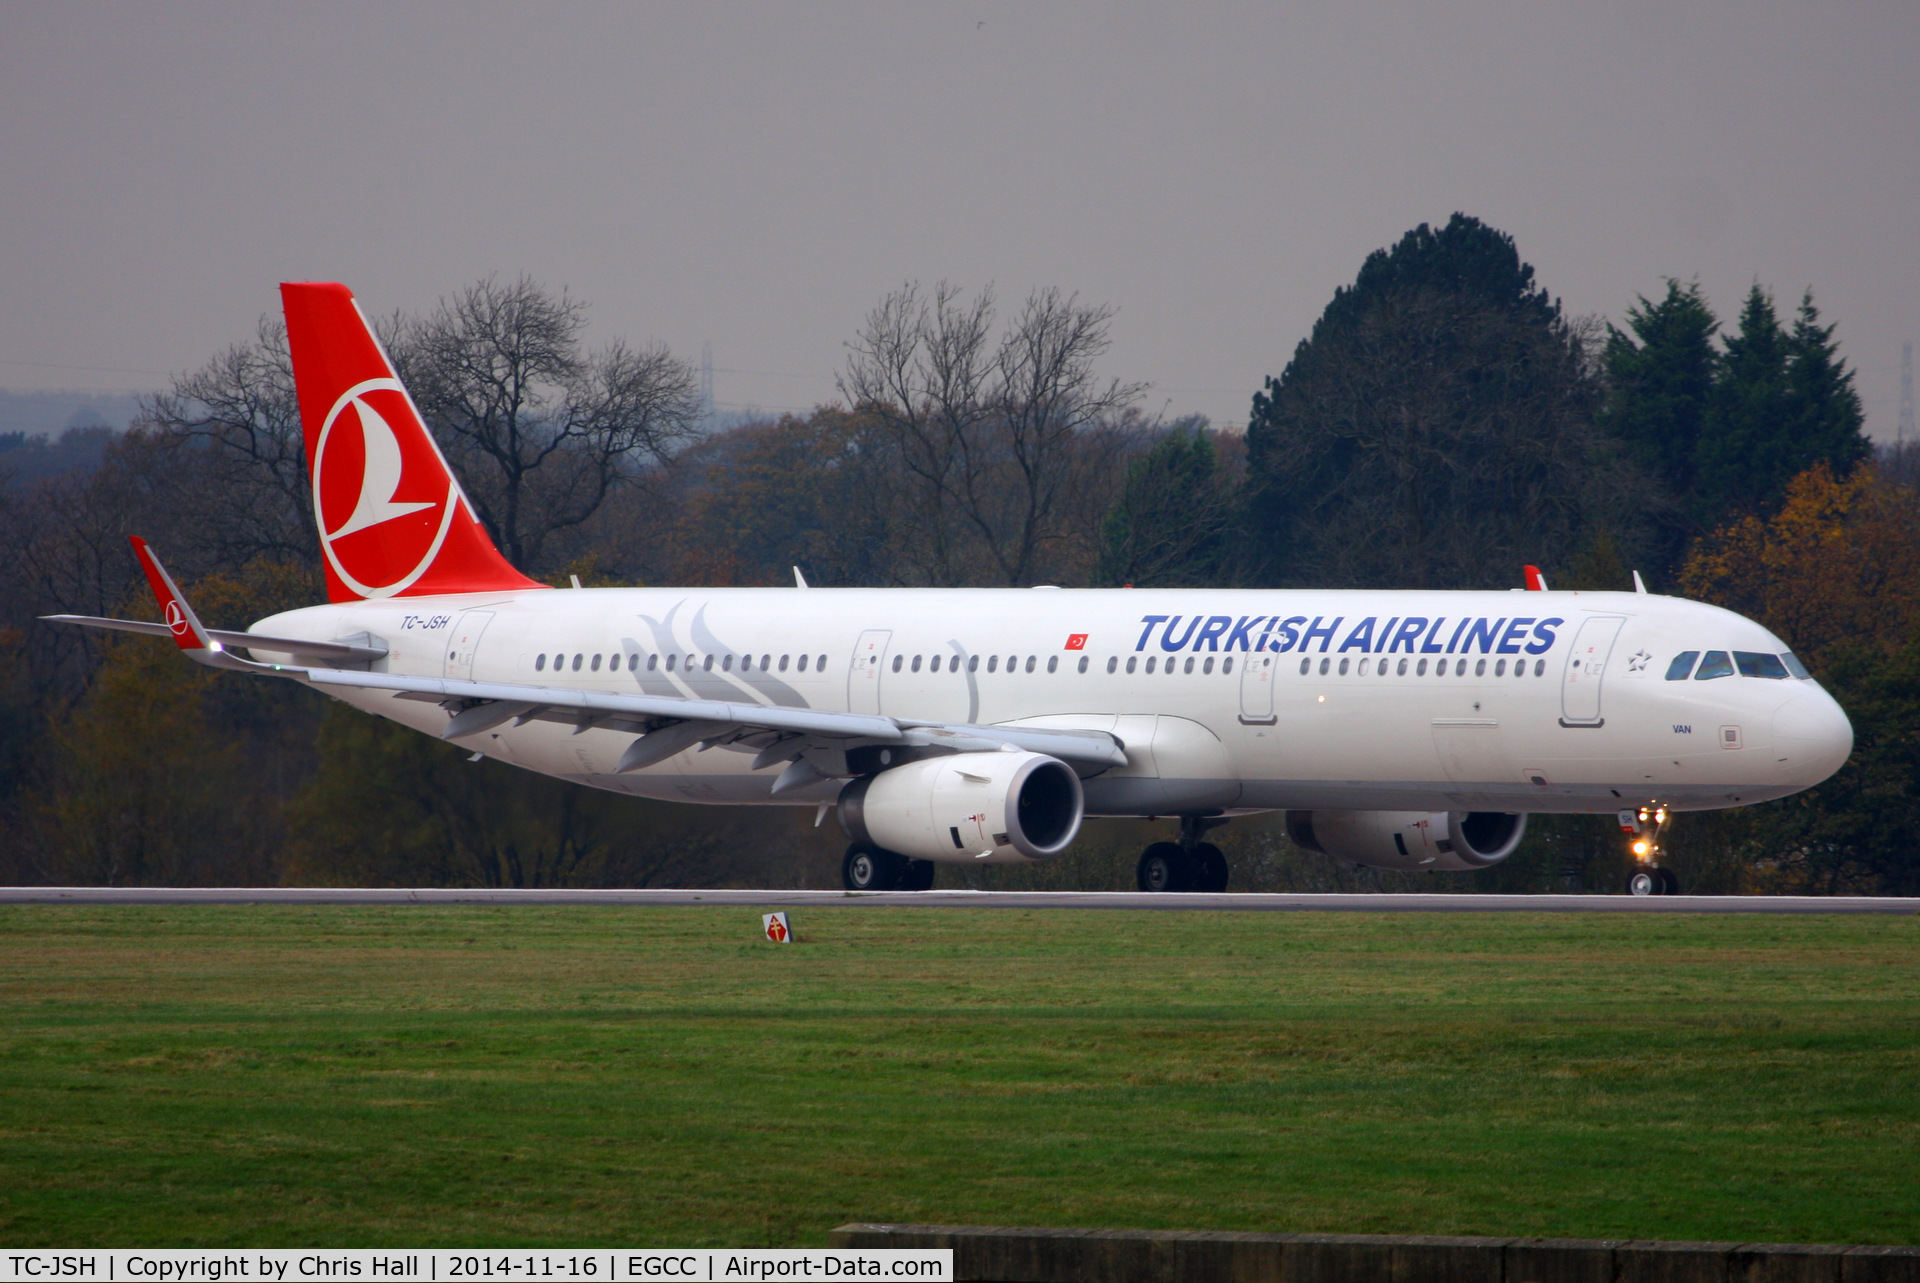 TC-JSH, 2013 Airbus A321-231 C/N 5546, Turkish Airlines